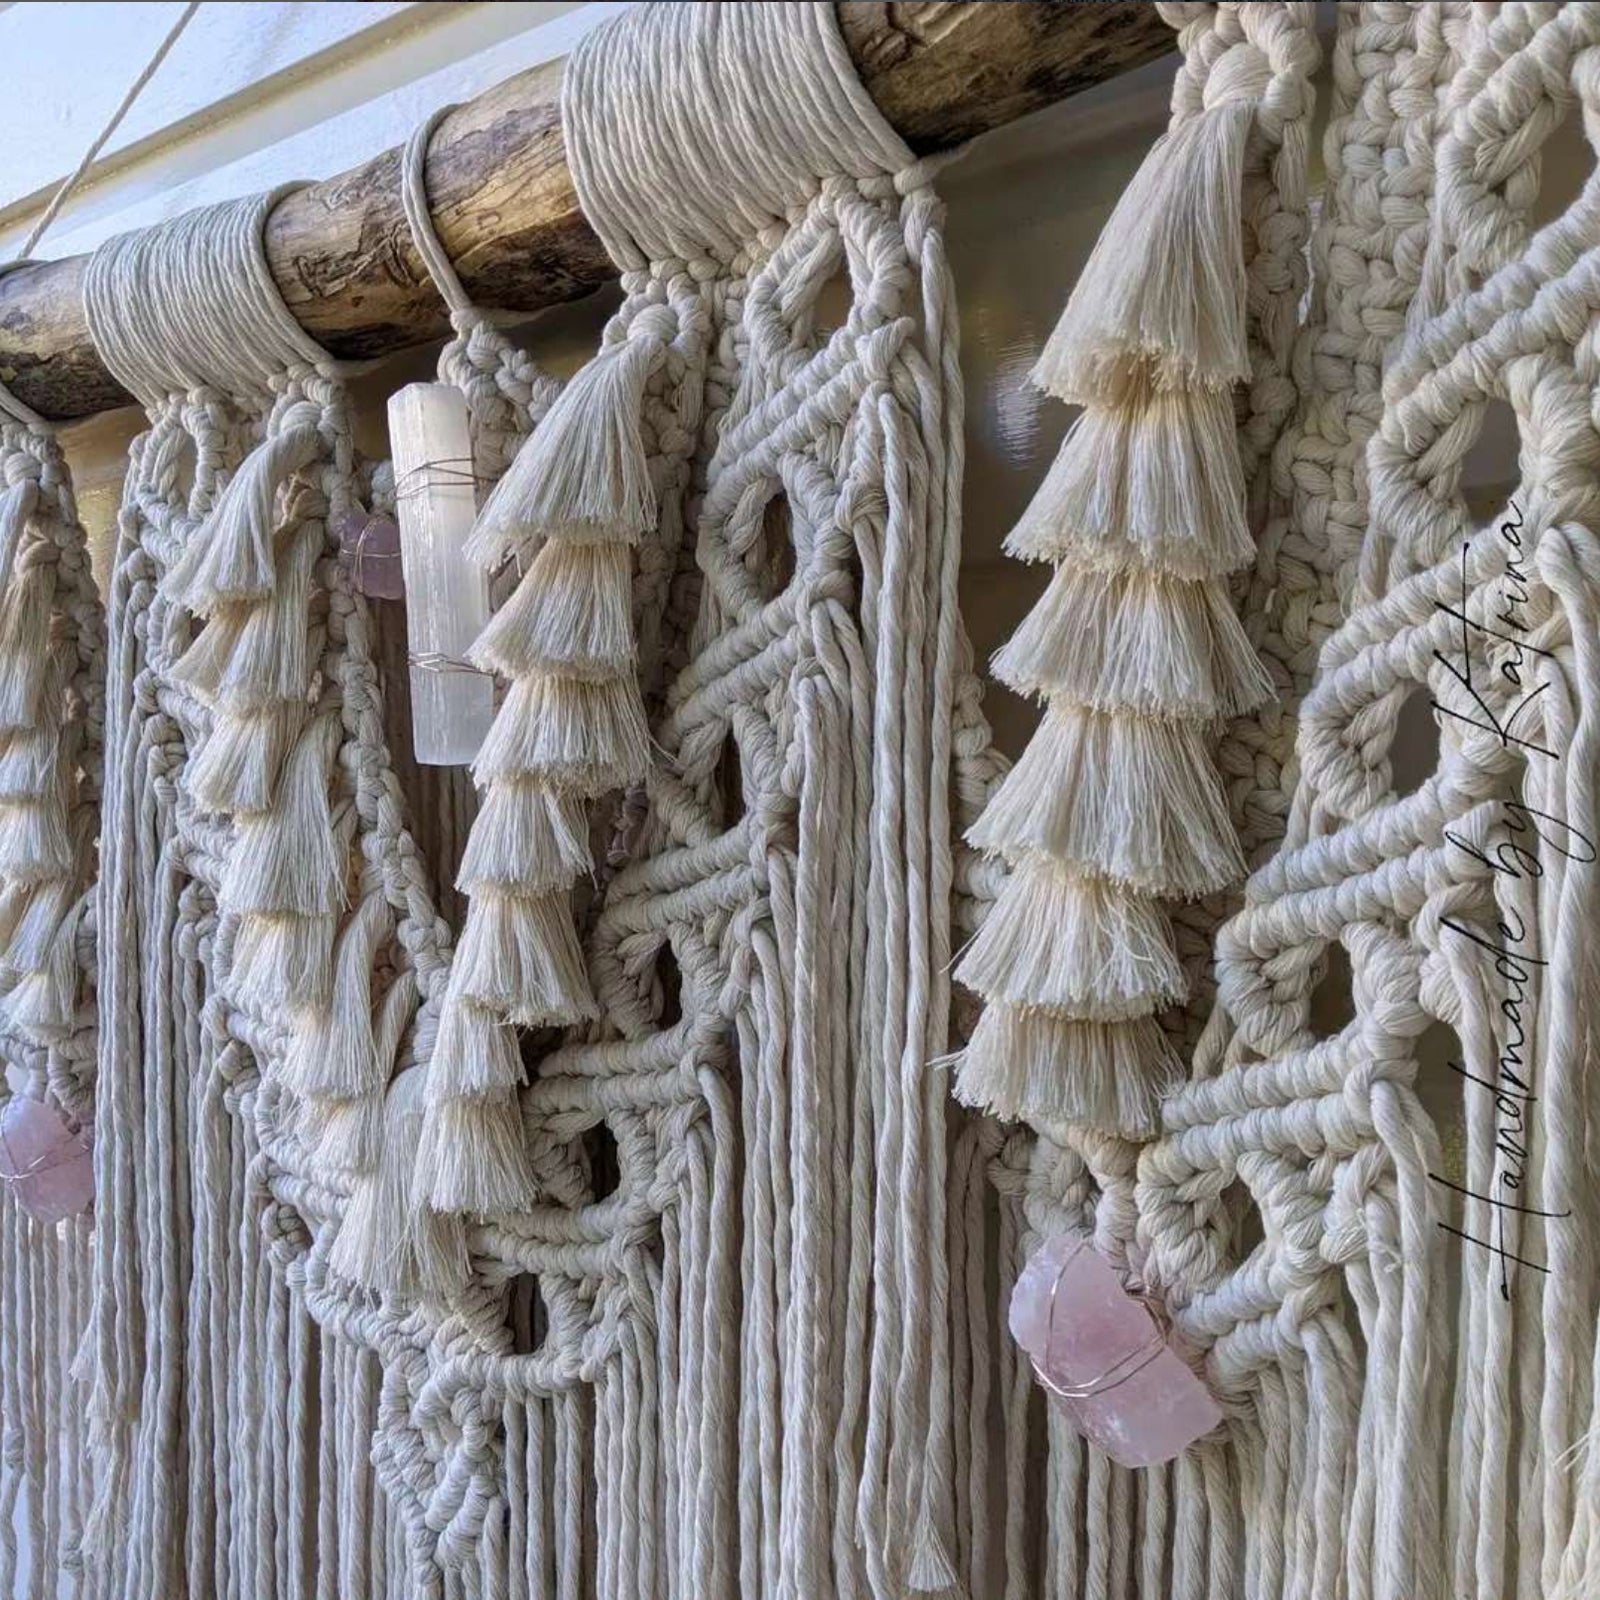 Hobby & Heart. How to successfully monetise your craft, from someone w -  Mary Maker Studio - Macrame & Weaving Supplies and Education.